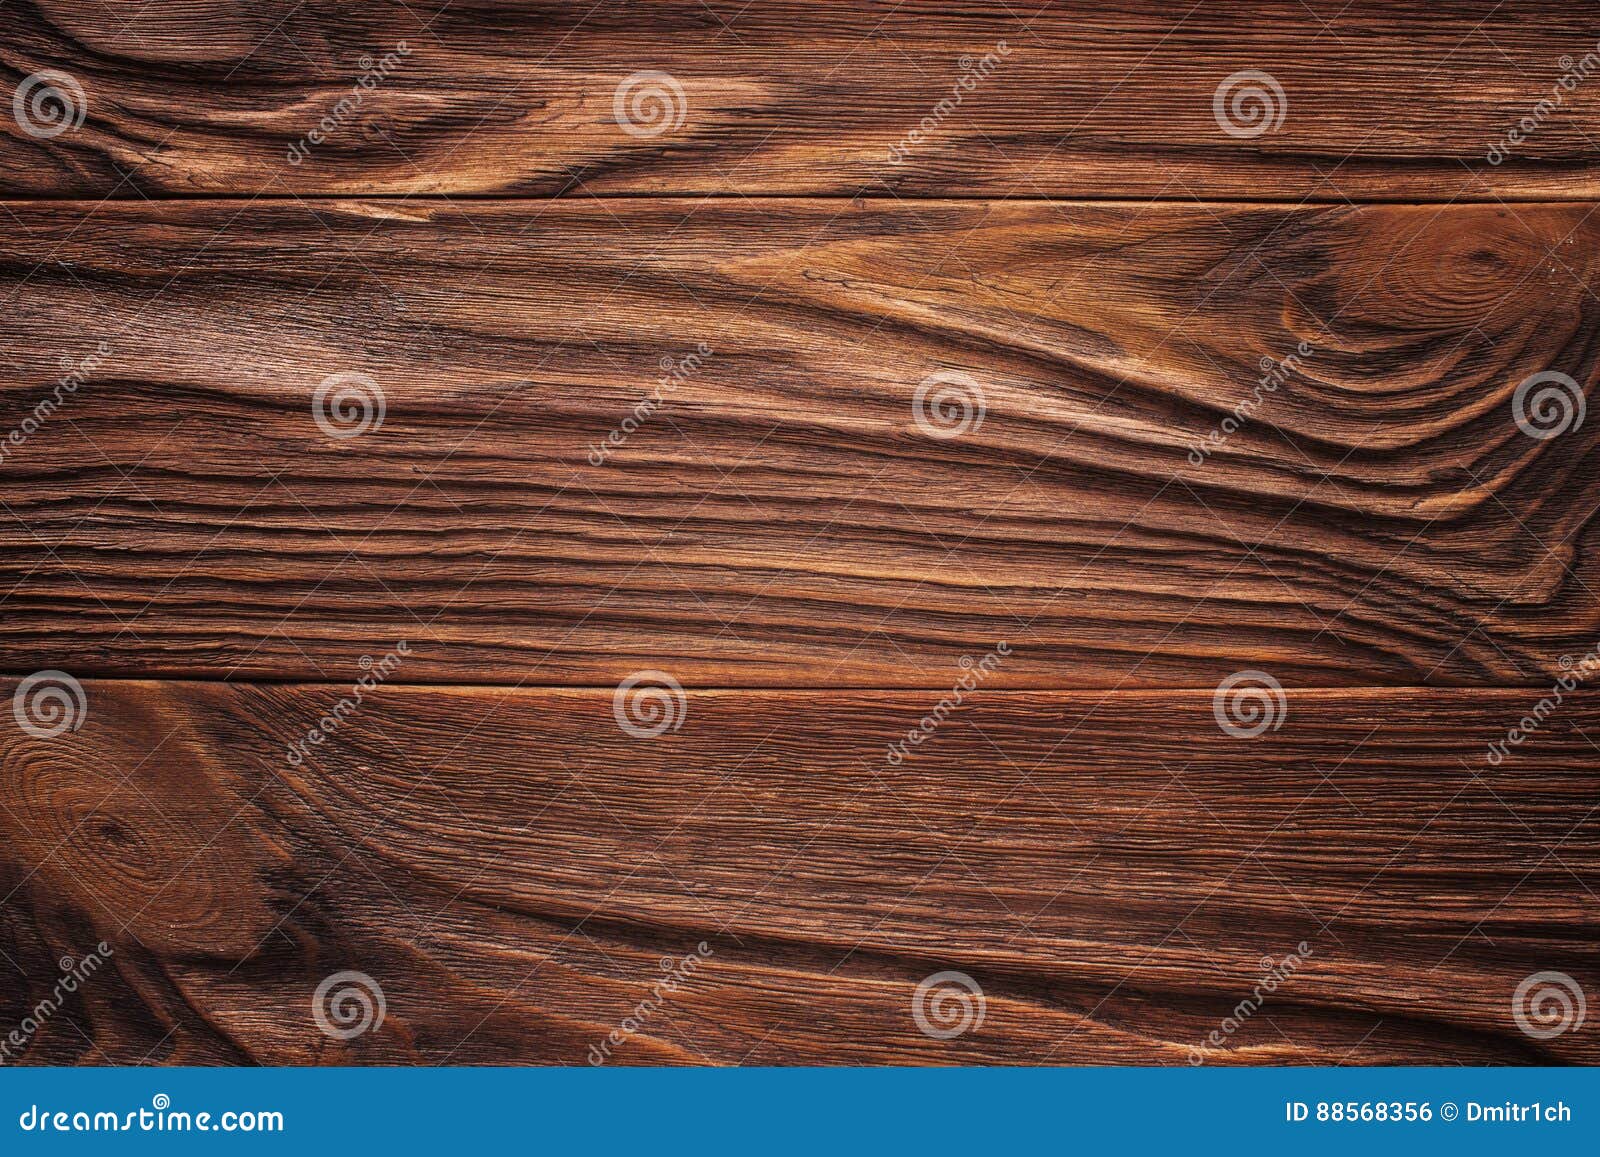 Old Wooden Table Top High Resolution Texture Stock Photo - Image of timber,  textured: 88568356